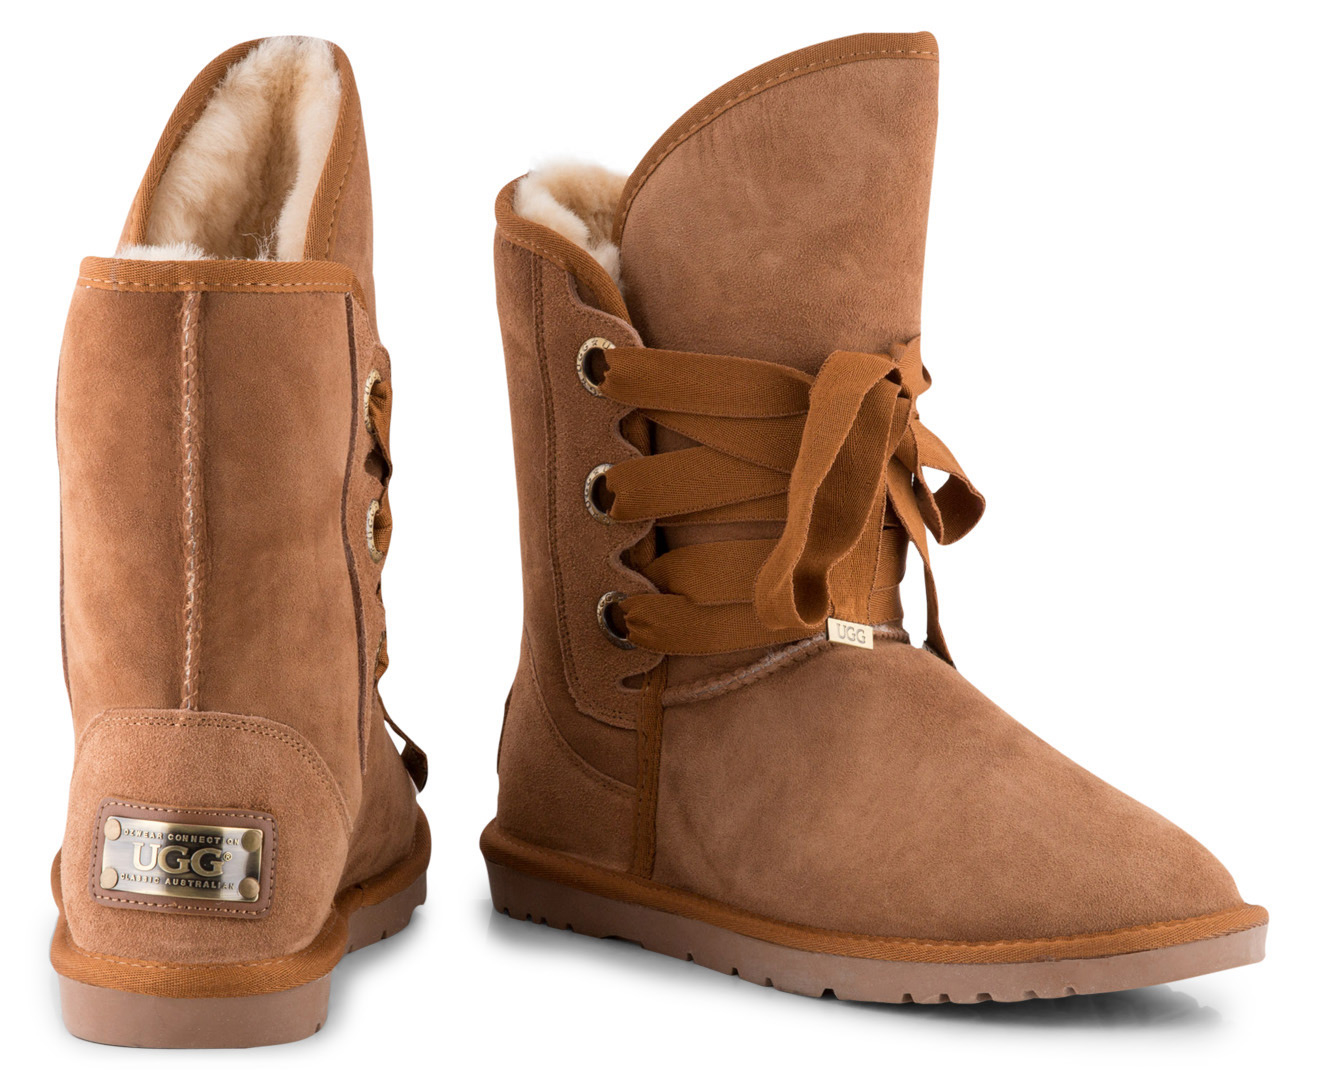 OZWEAR Connection Ugg Bedouin Boot - Chestnut